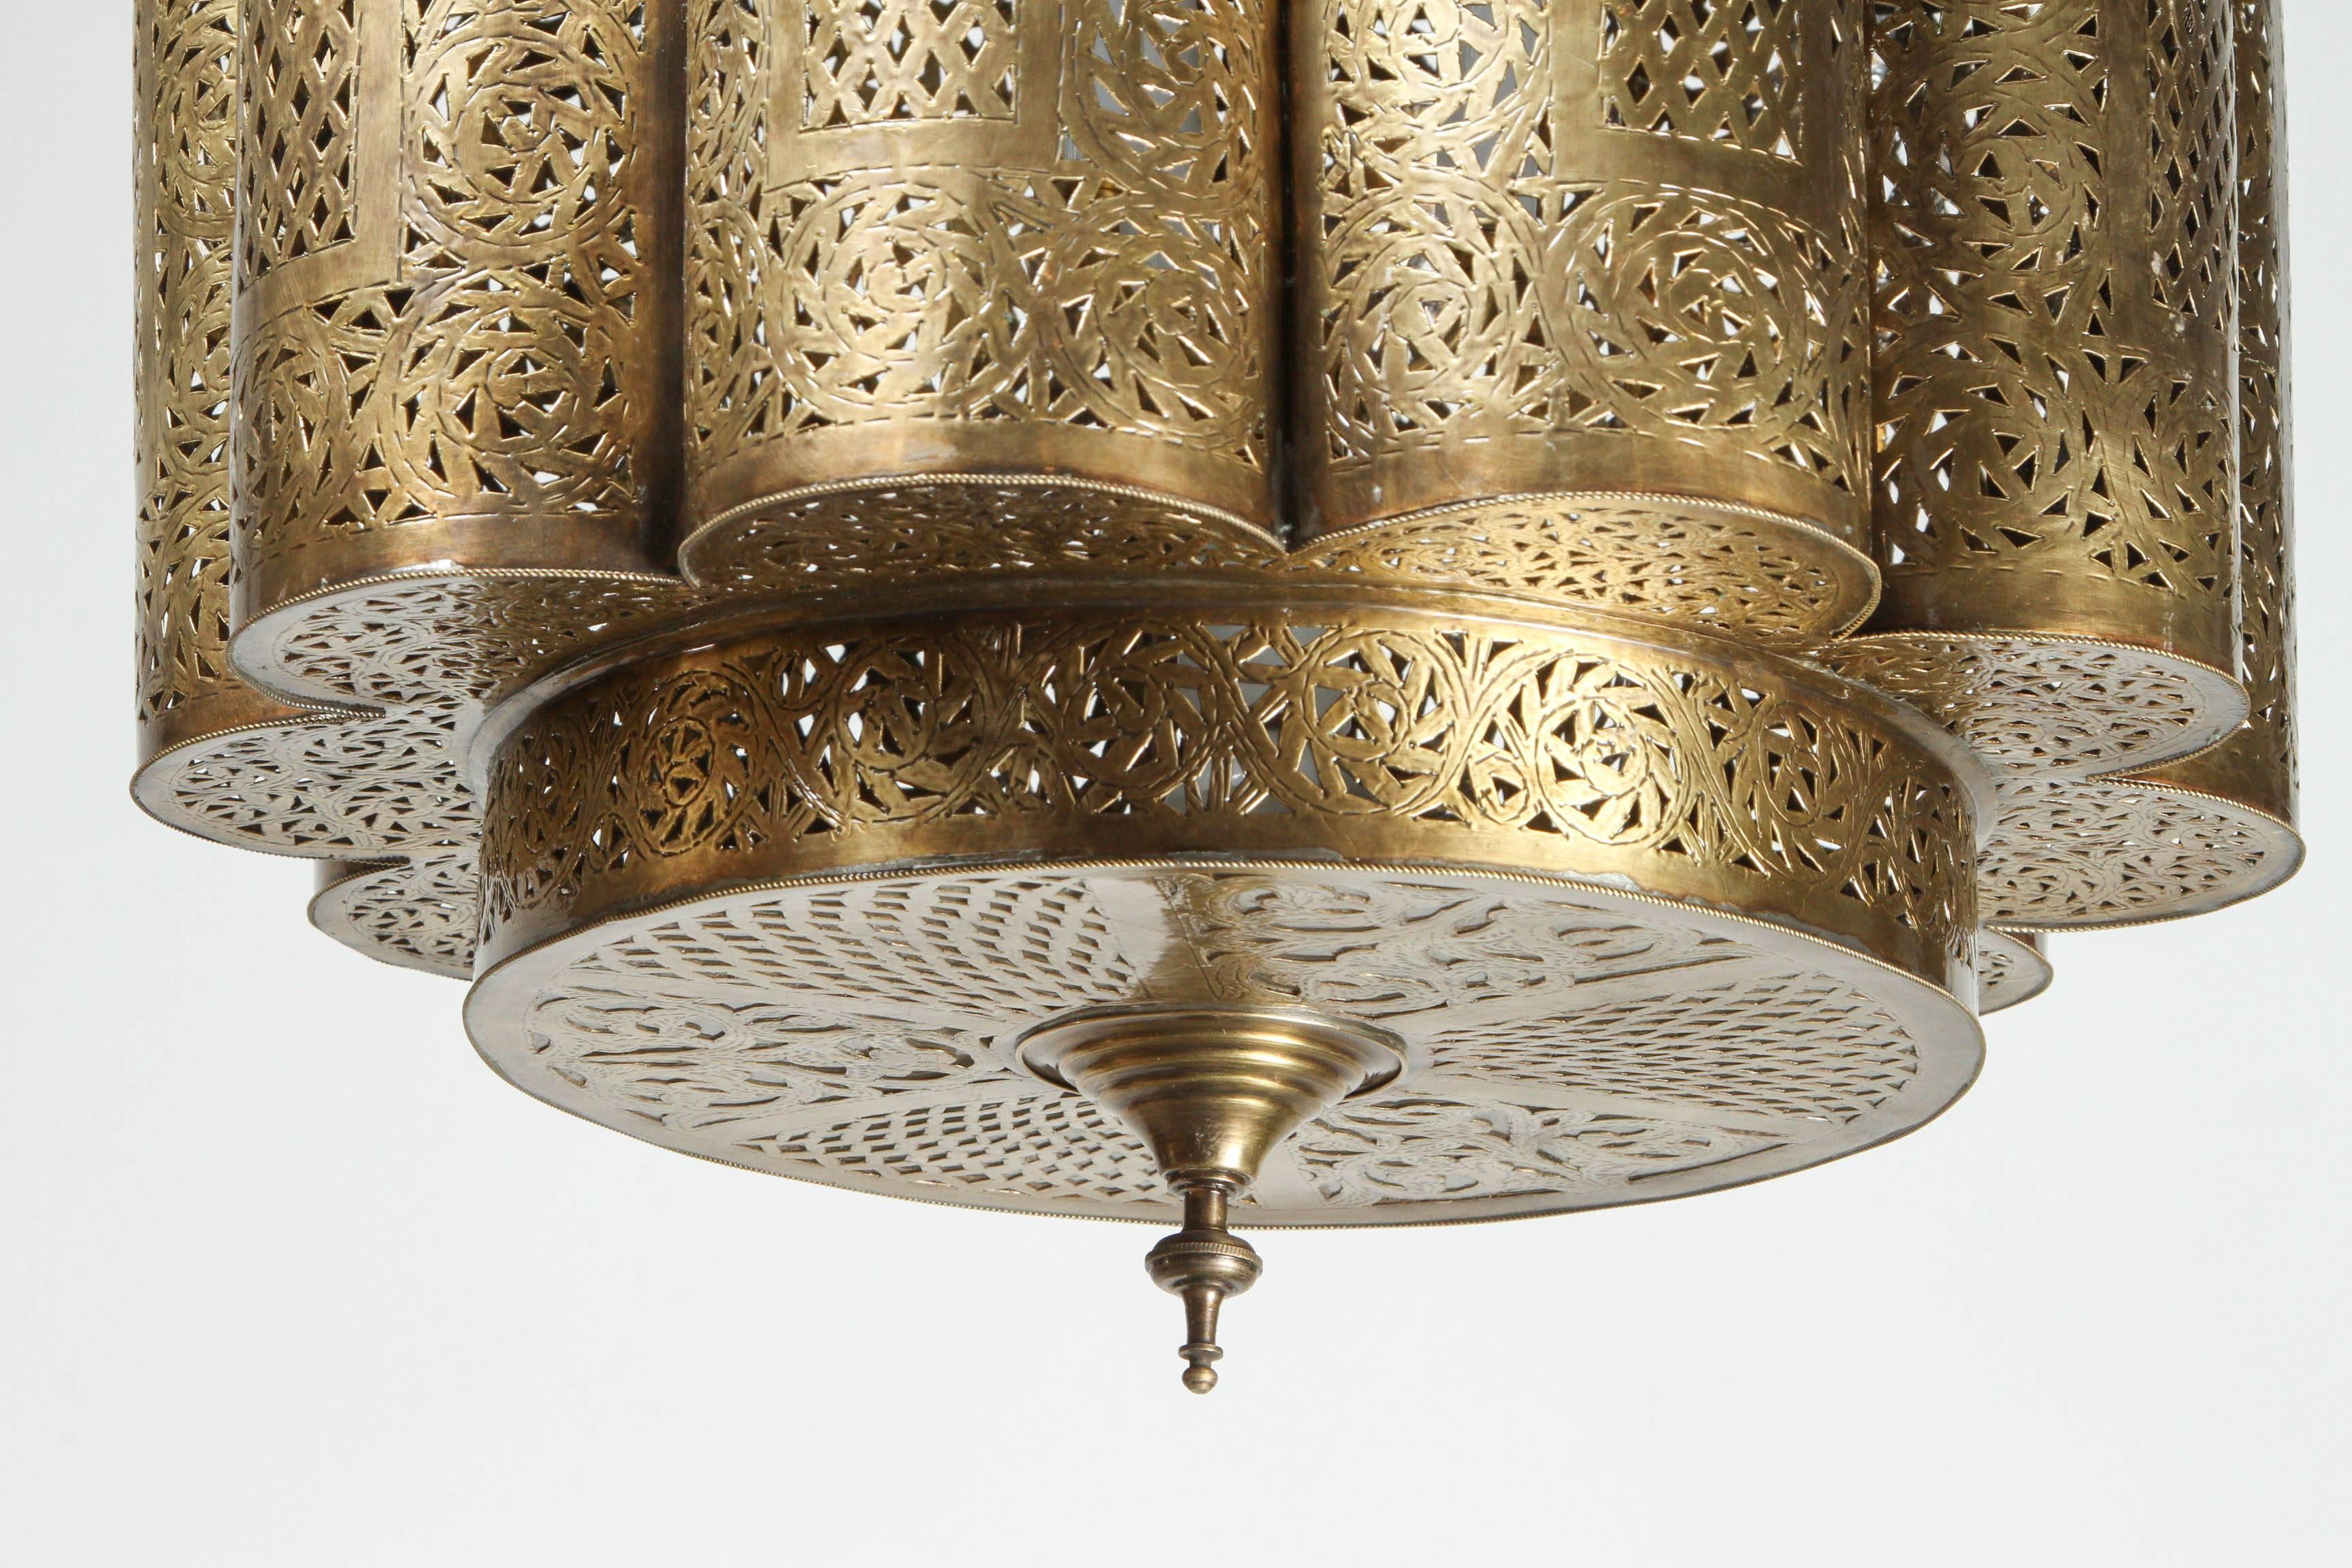 Large pair of pierced brass Moroccan chandelier in the style of Alberto Pinto design.
This Moorish light fixture is delicately hand-crafted, hand hammered and chiseled with fine Moorish filigree designs by skilled Moroccan artisans.
A pair is